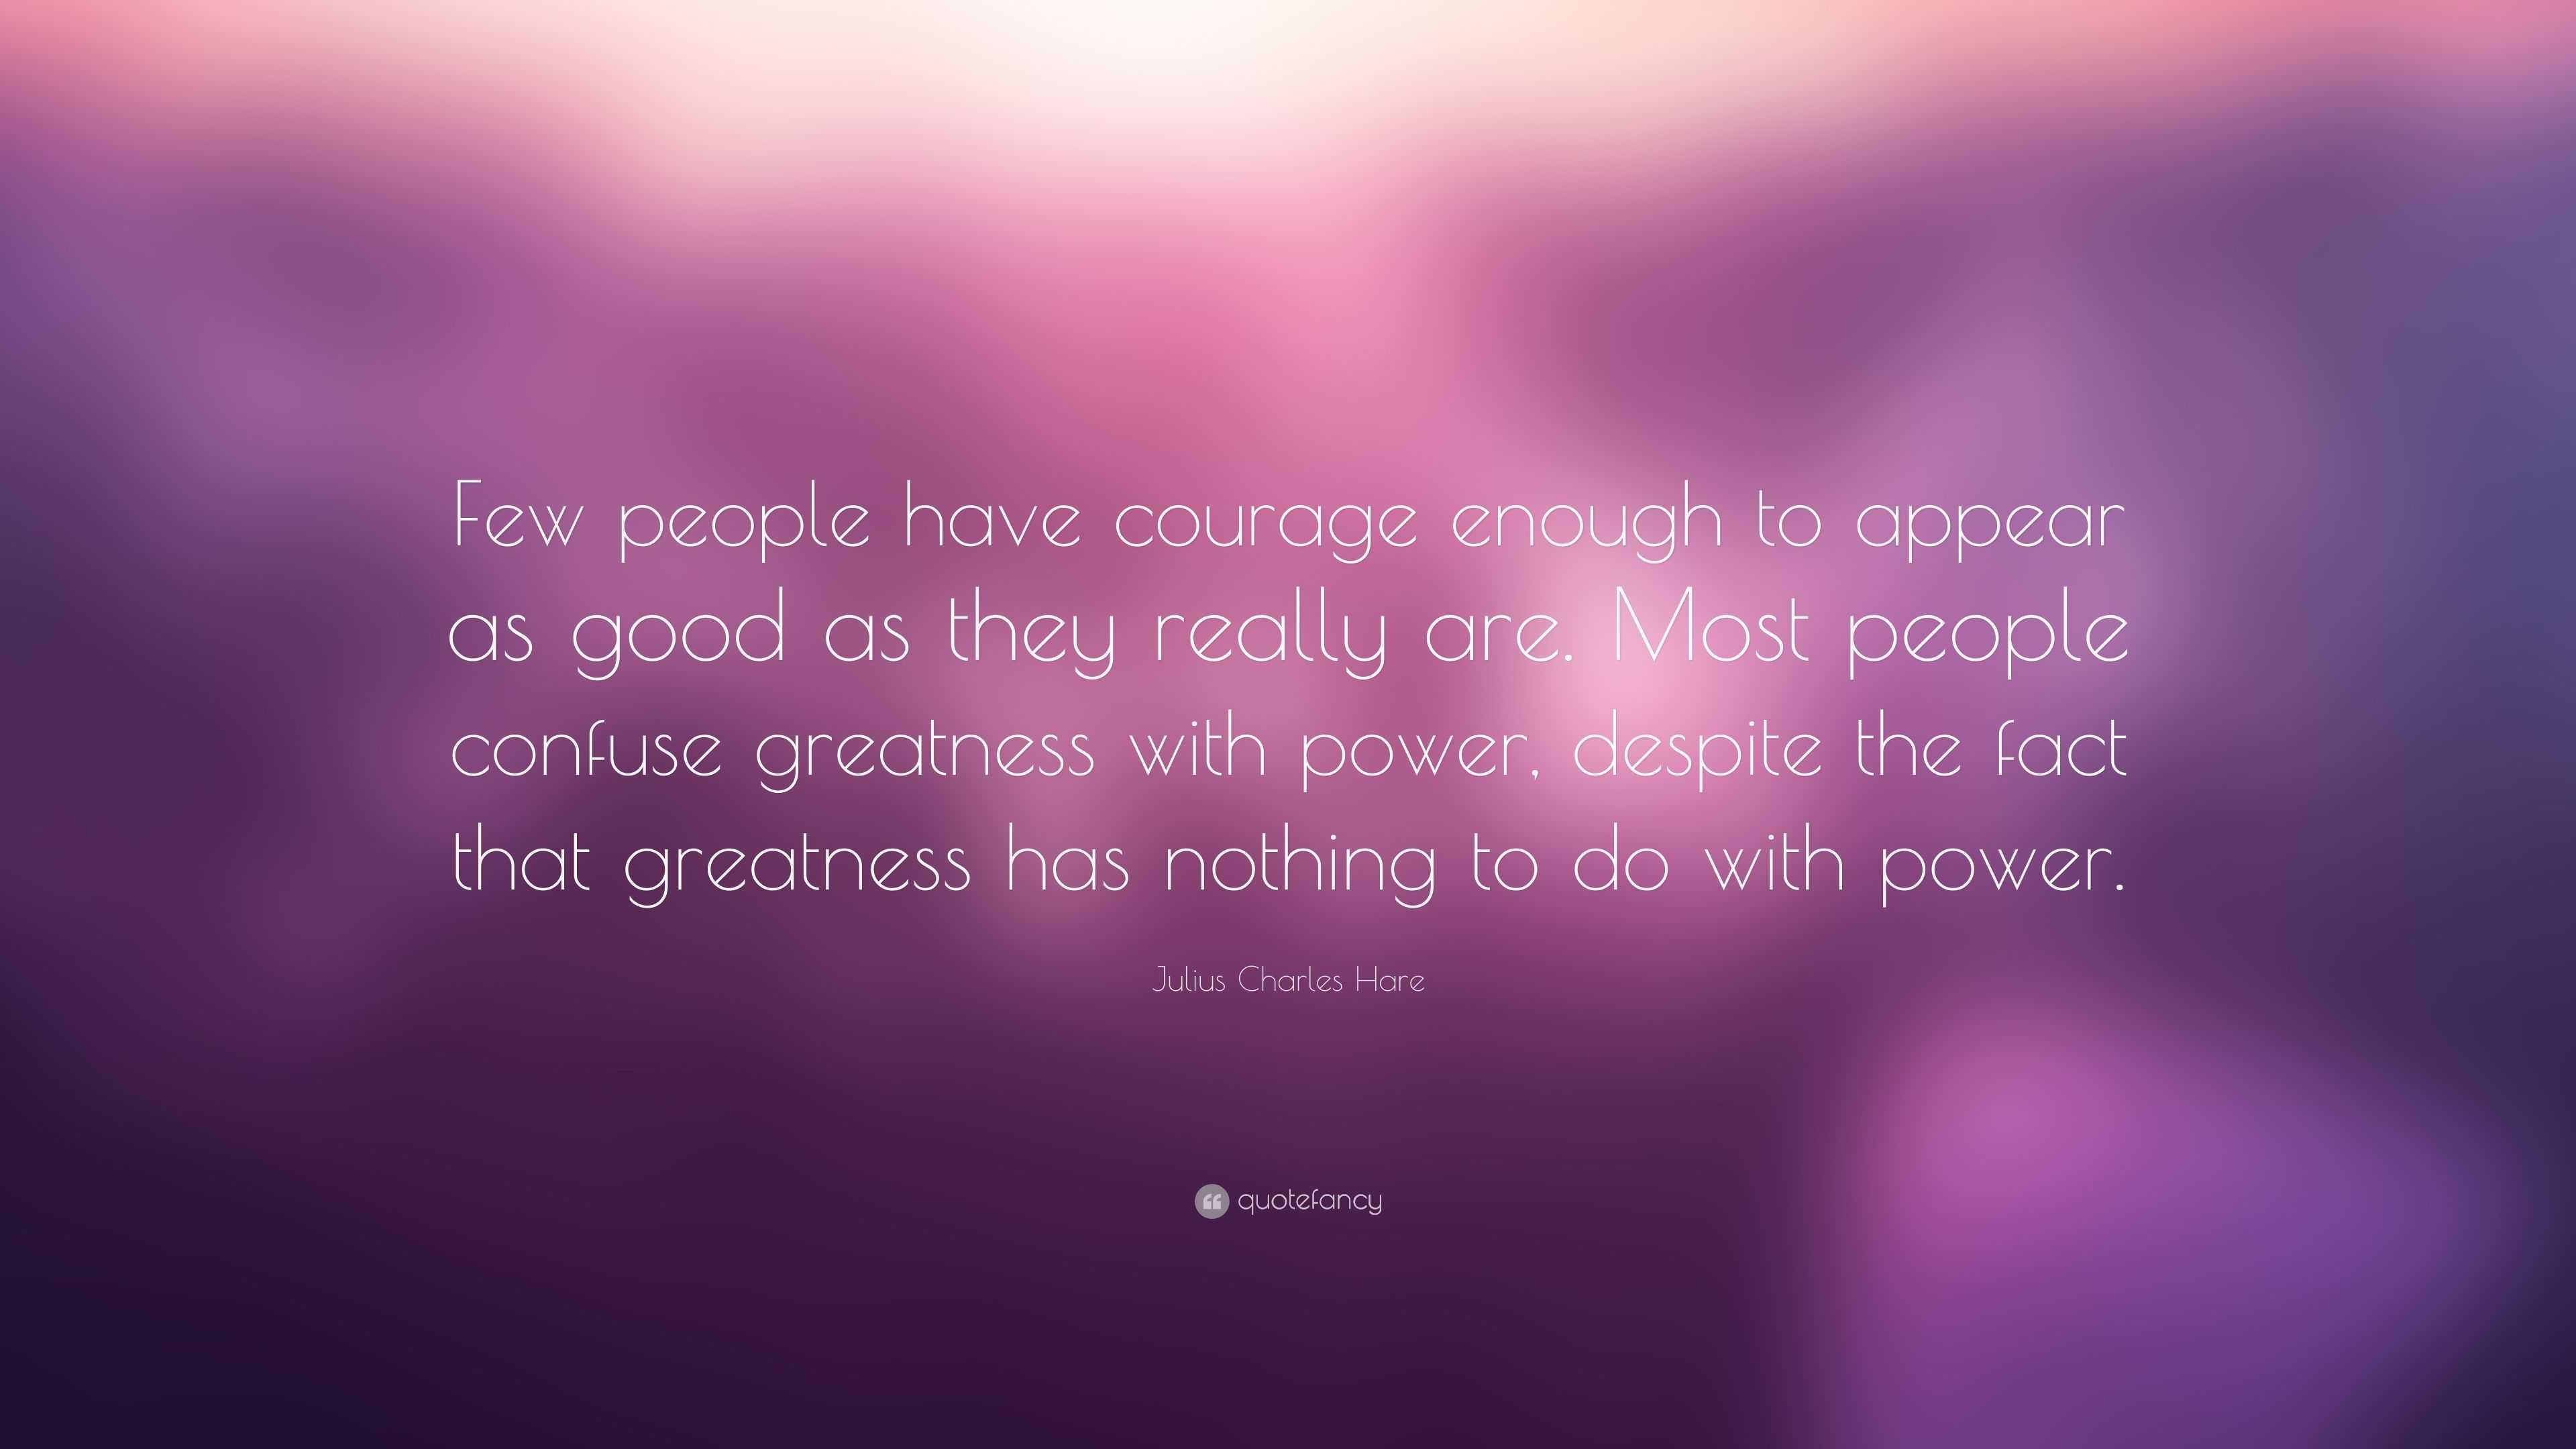 Julius Charles Hare Quote: “Few people have courage enough to appear as ...